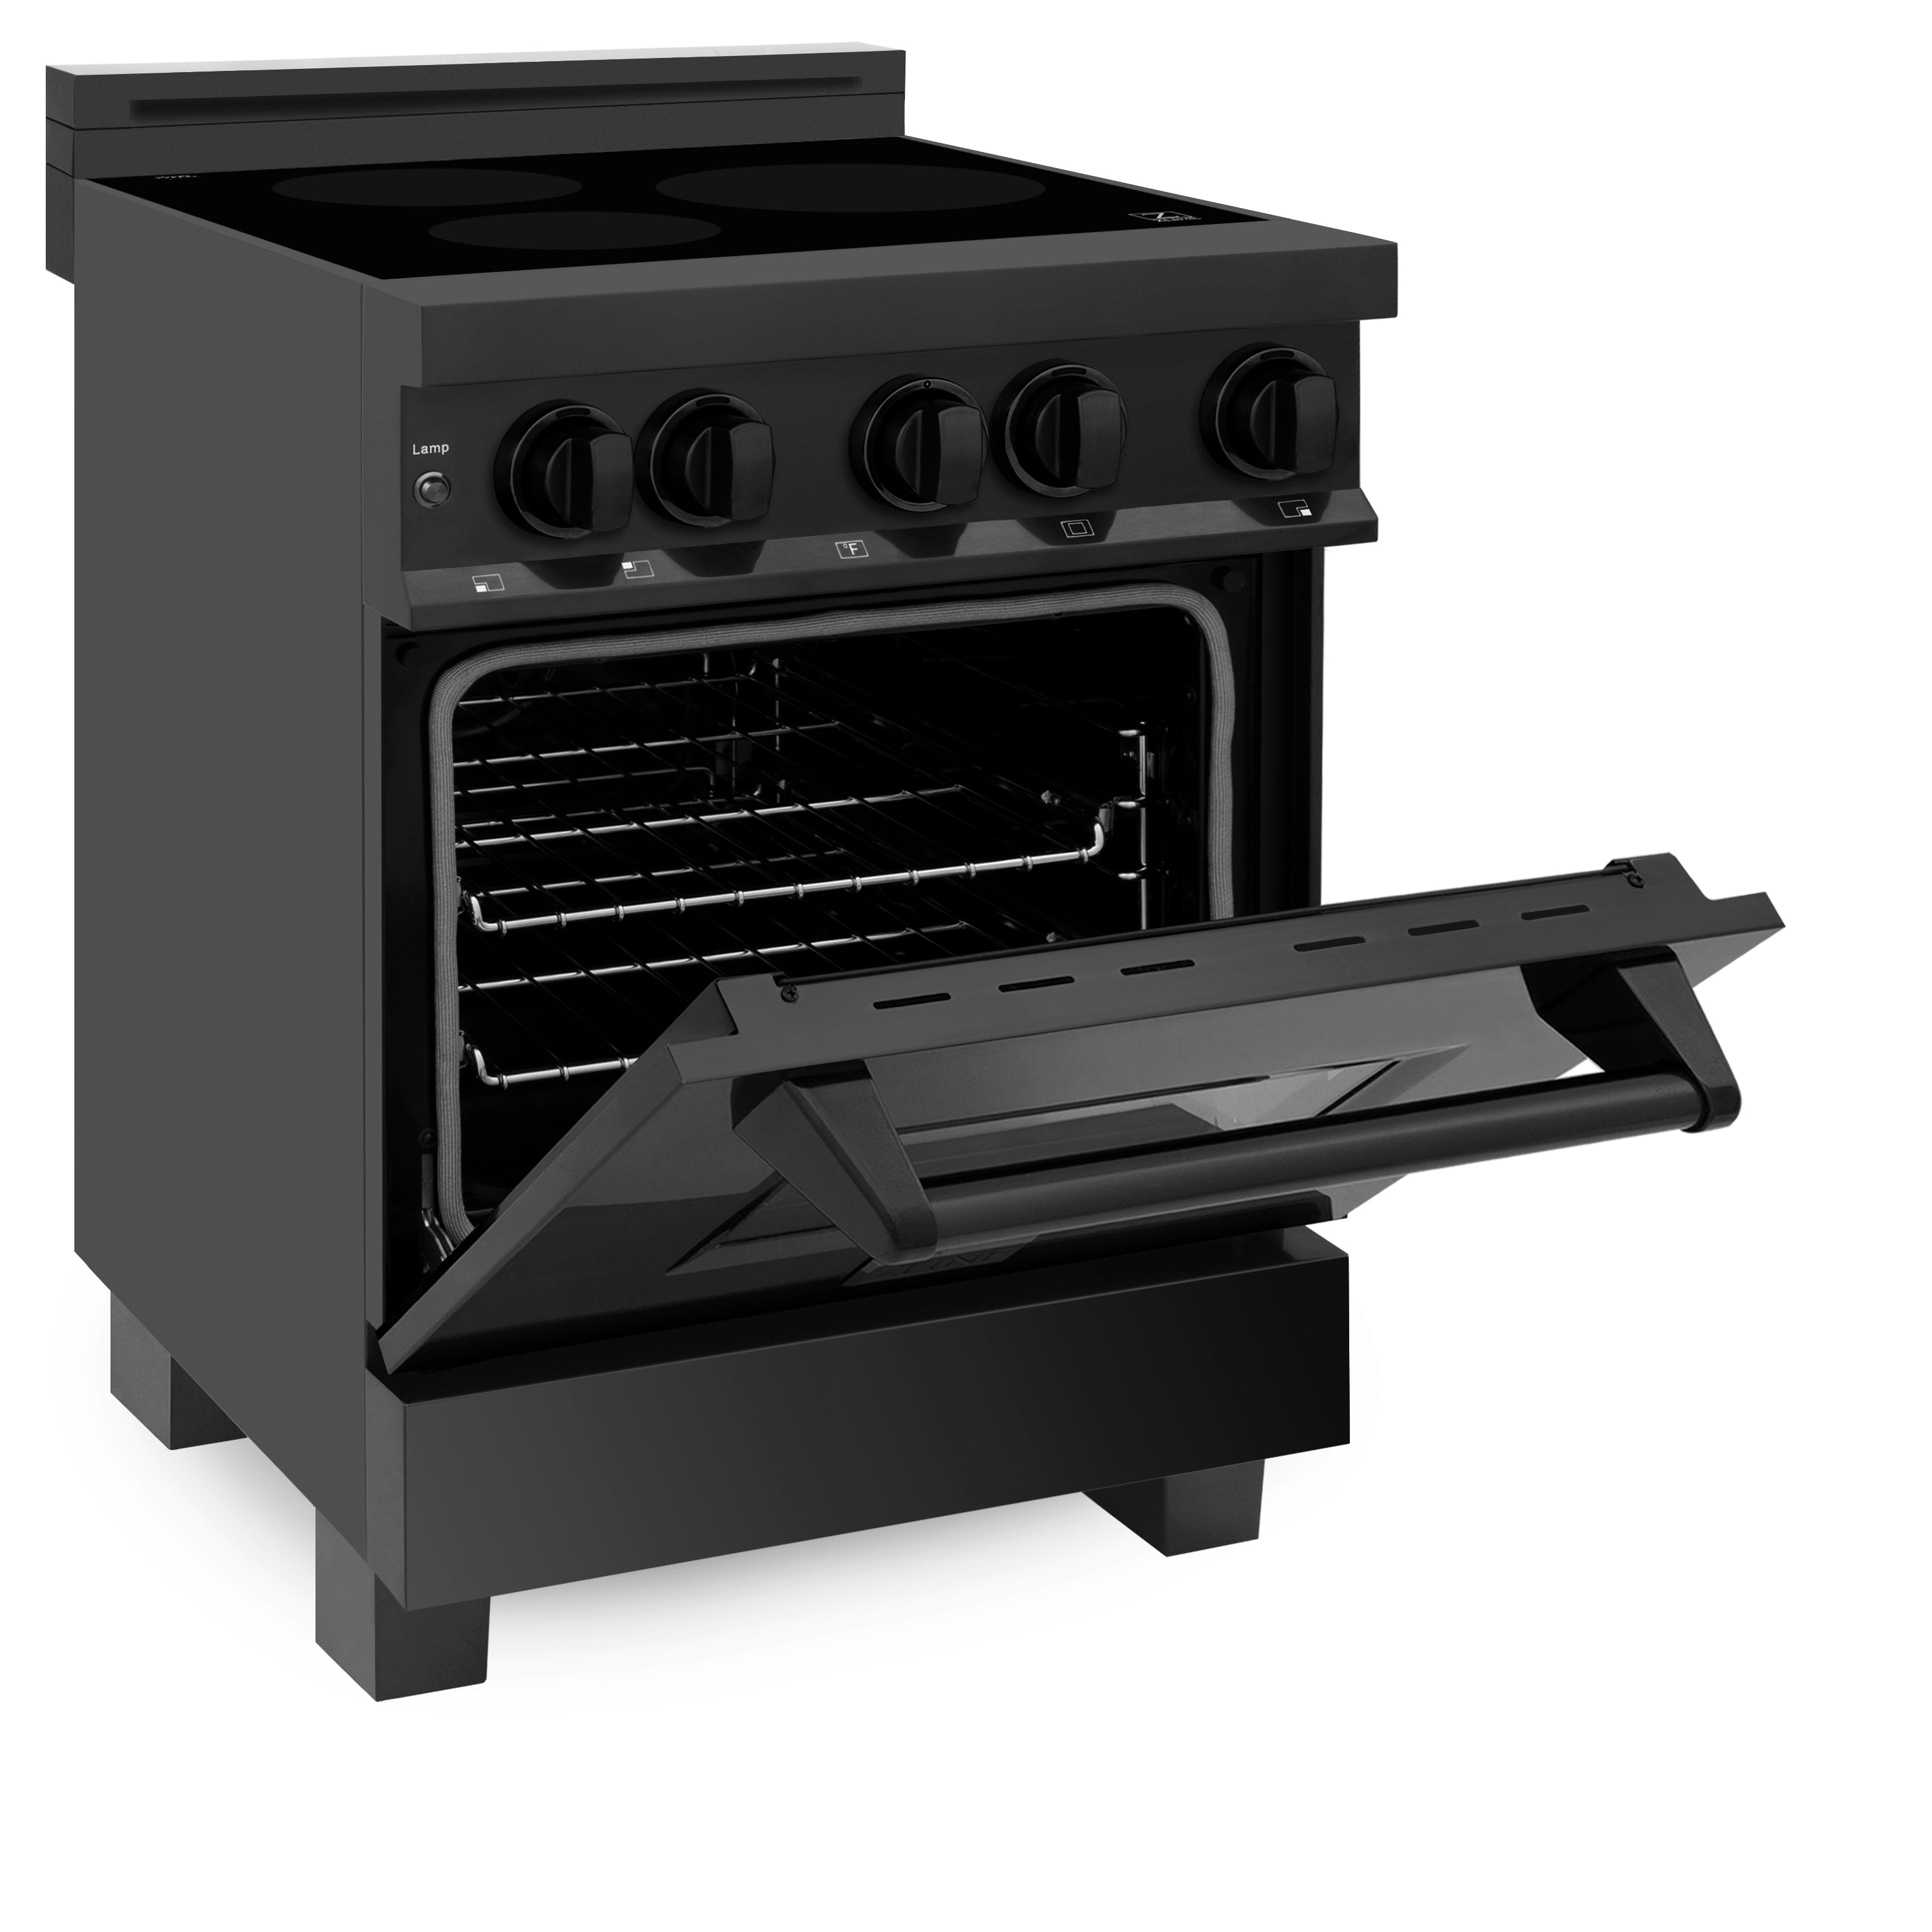 ZLINE 24" 2.8 cu. ft. Induction Range with a 3 Element Stove and Electric Oven in Black Stainless Steel (RAIND-BS-24)